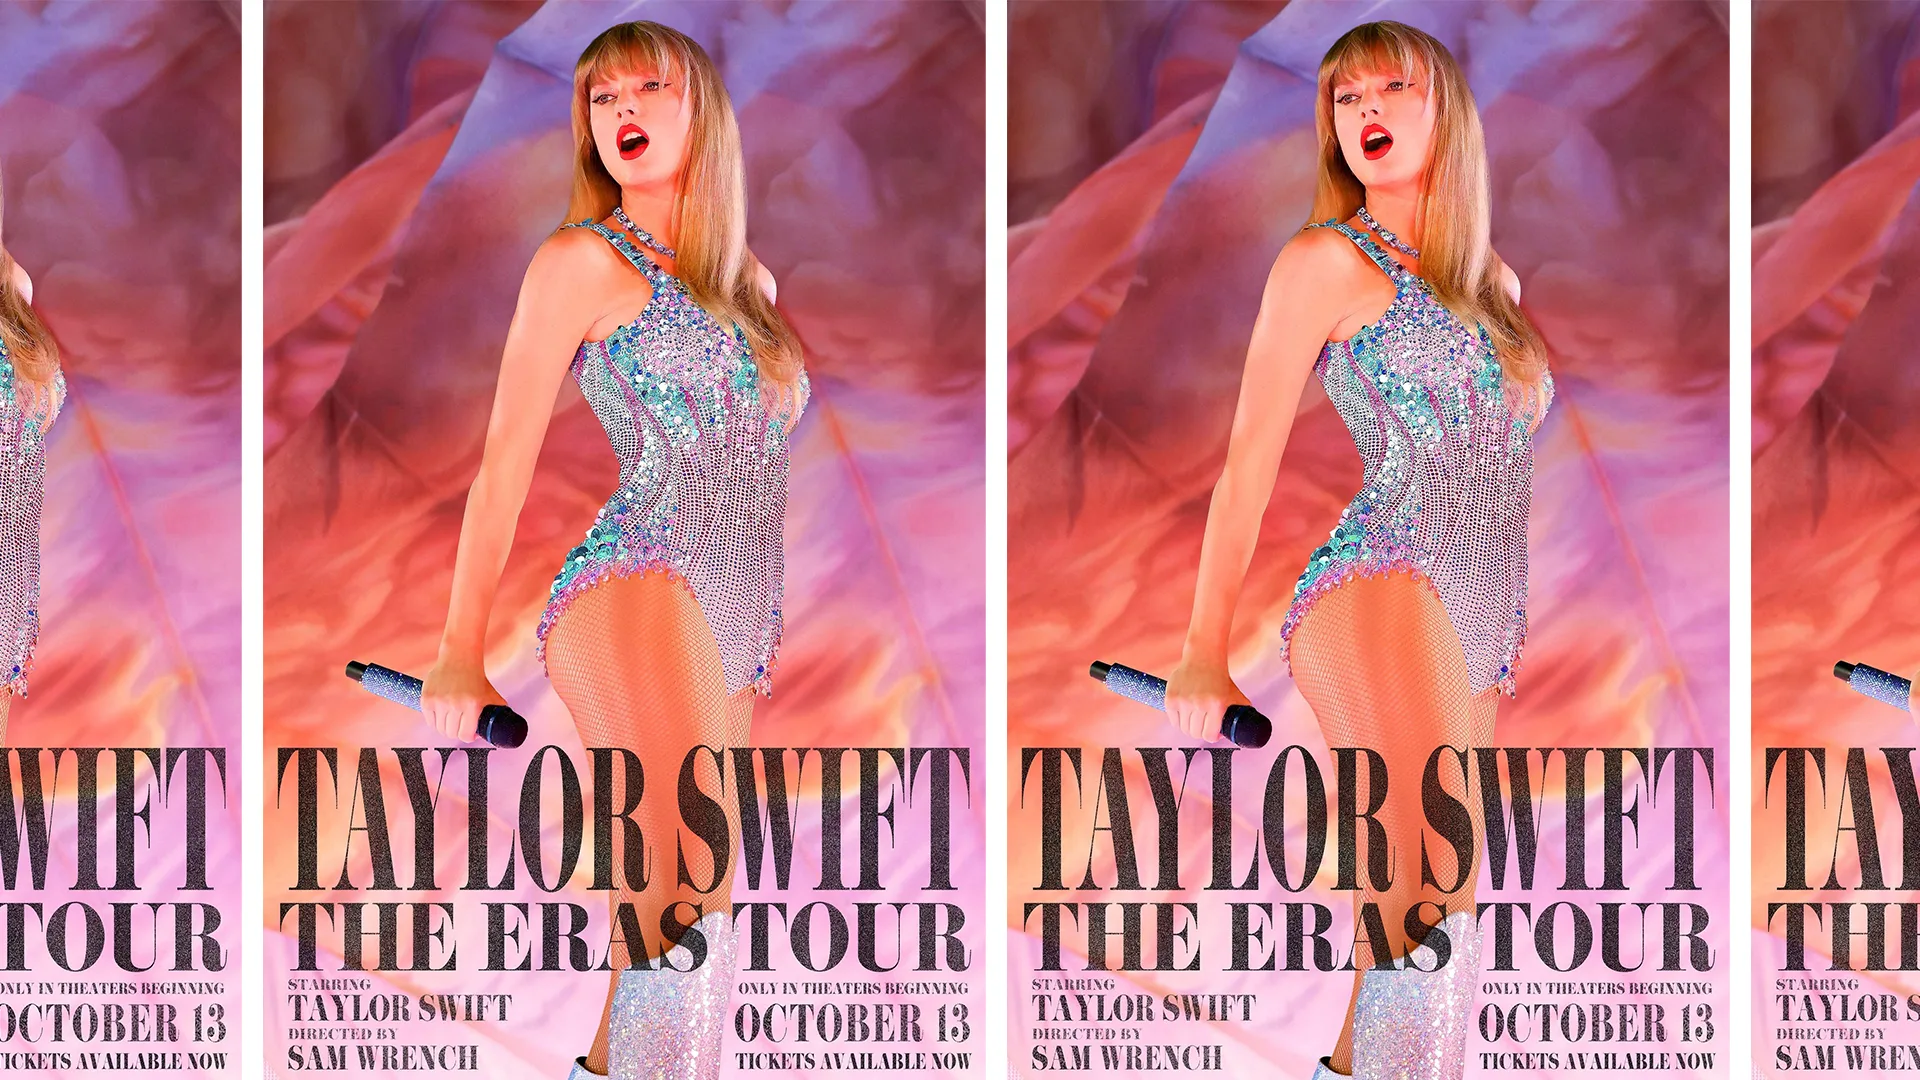 Taylor Swift The Eras Tour poster showing Taylor Swift in sequin bodysuit embellished with purple, light blue and silver crystals and sequins